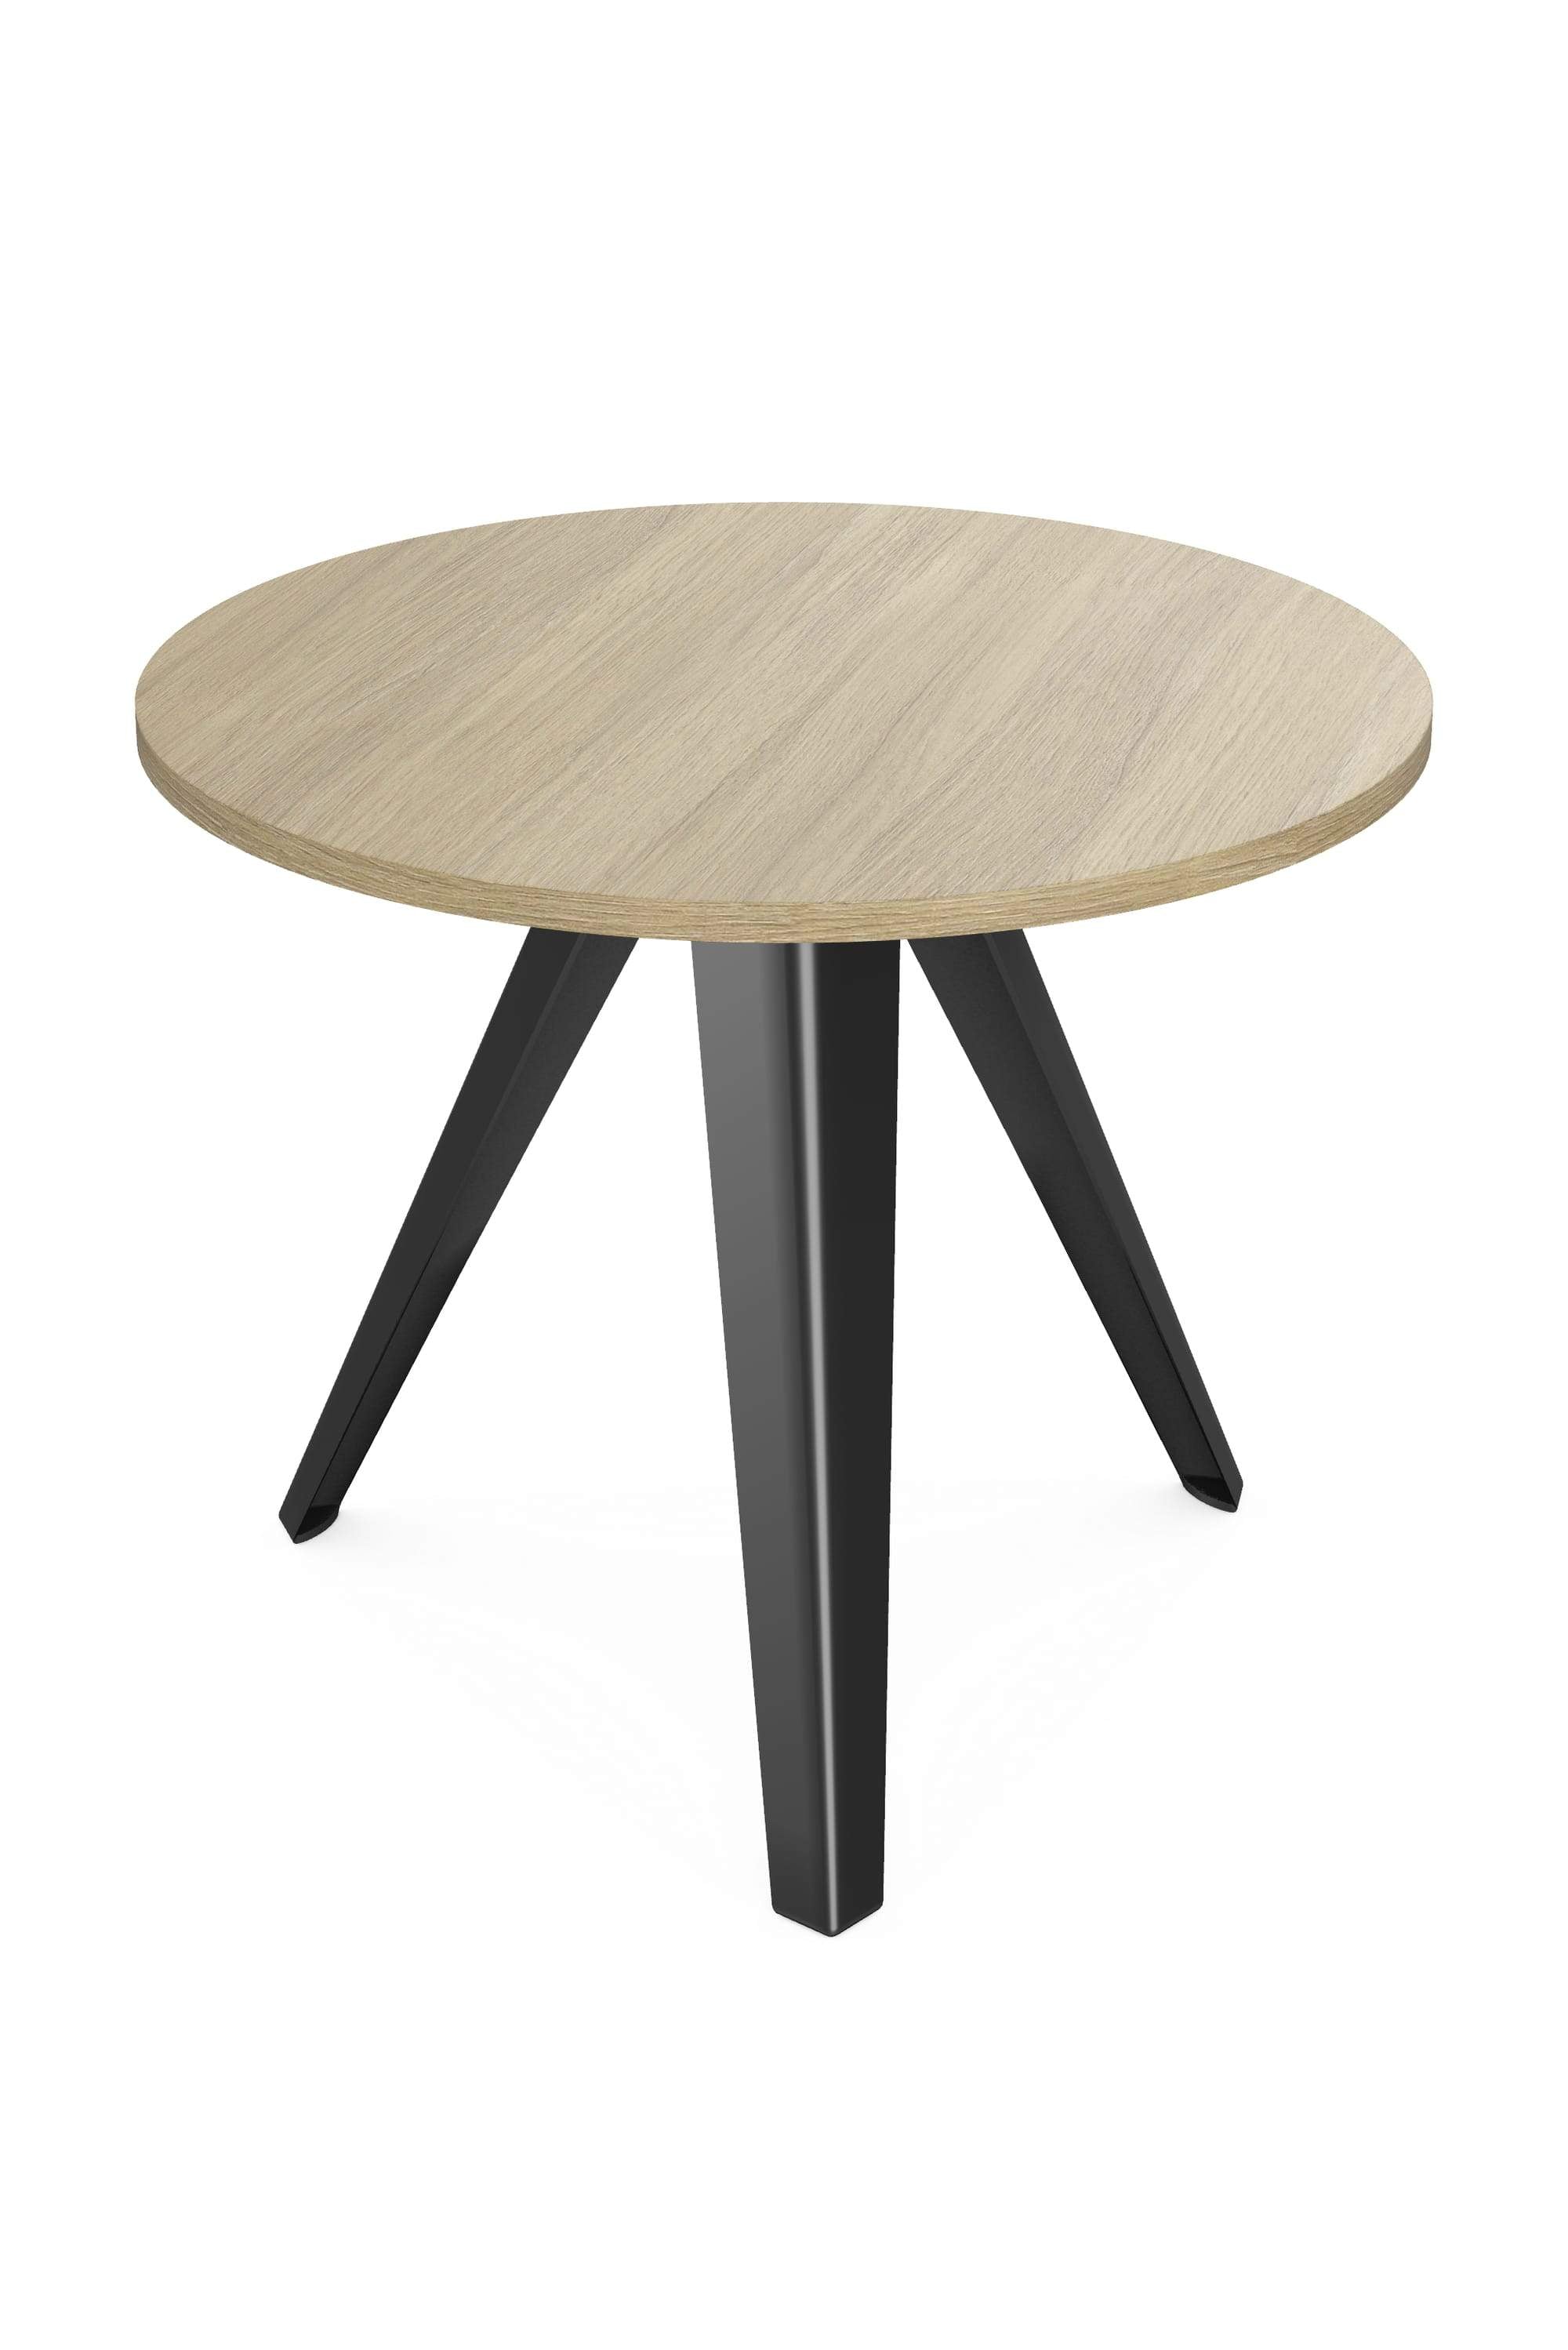 Sove Small Tables SV-99